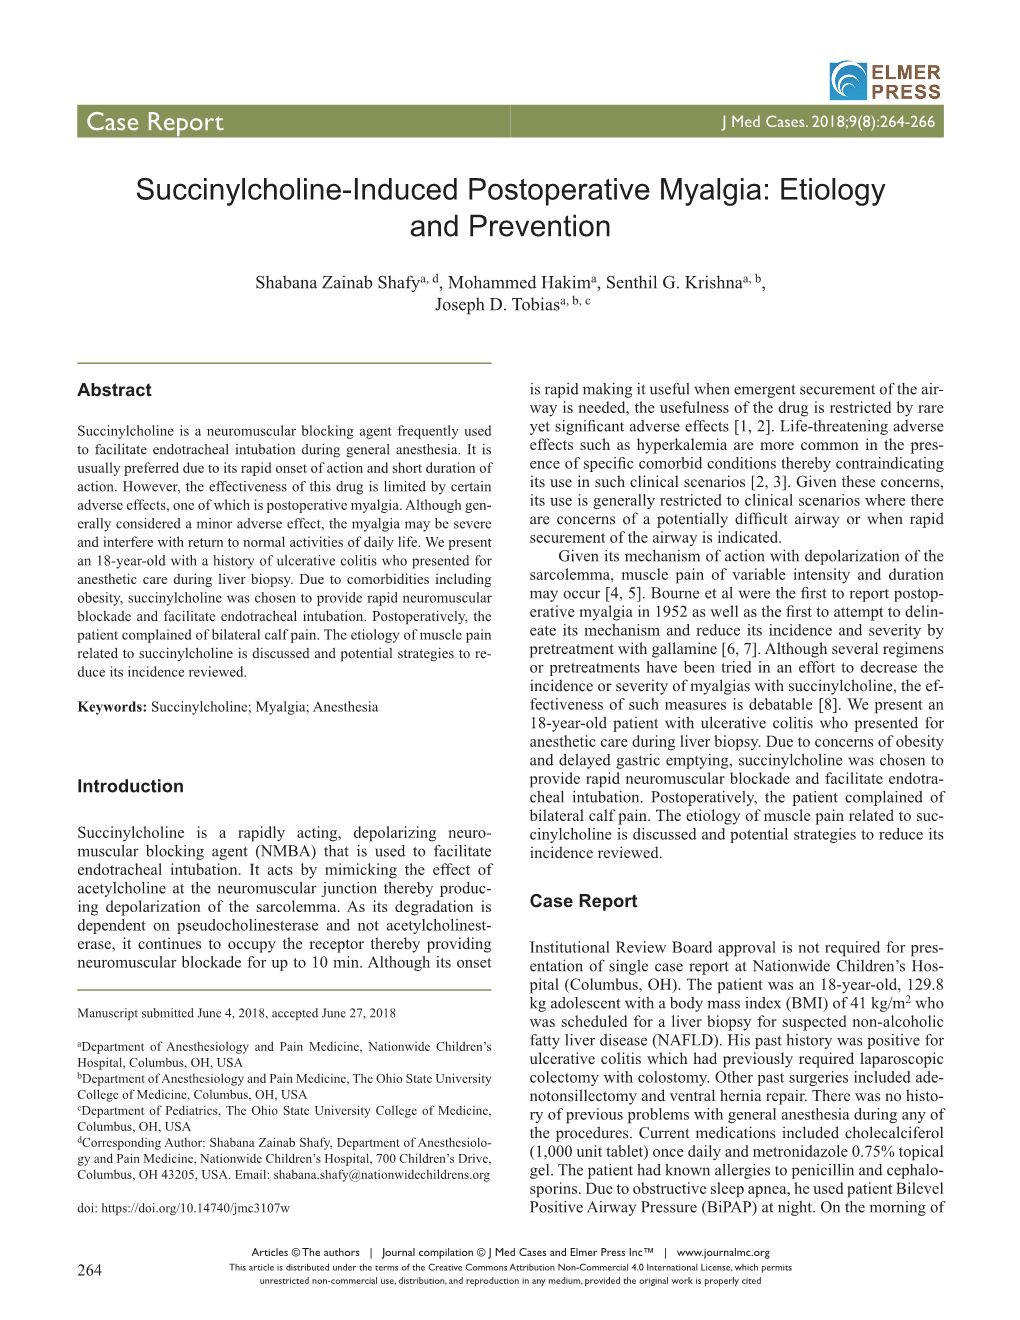 Succinylcholine-Induced Postoperative Myalgia: Etiology and Prevention